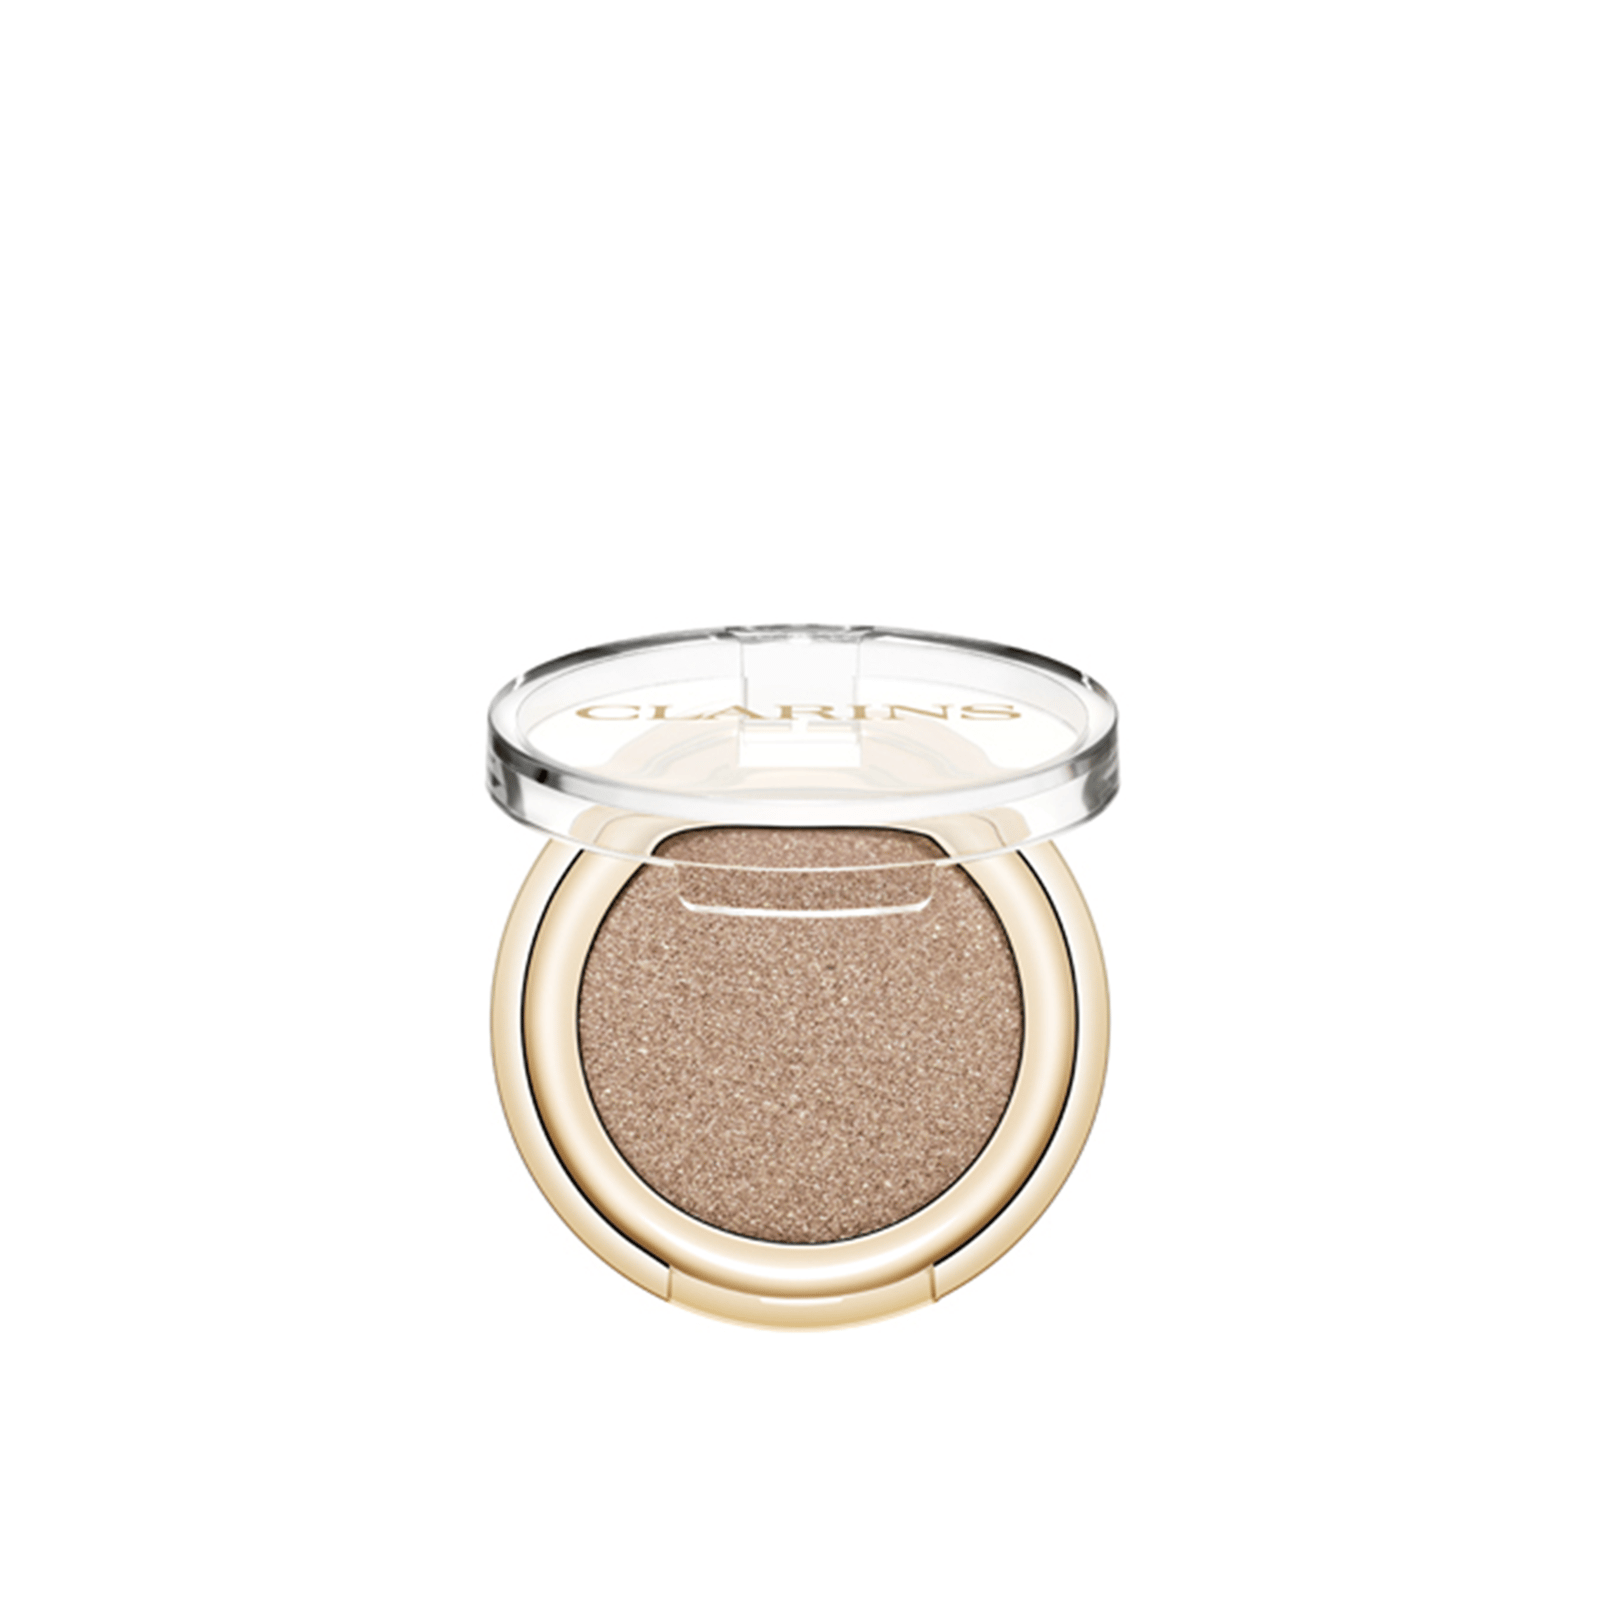 Clarins Ombre Skin Intense Colour Powder Eyeshadow 03 Pearly Gold 1.5g (0.05 oz)